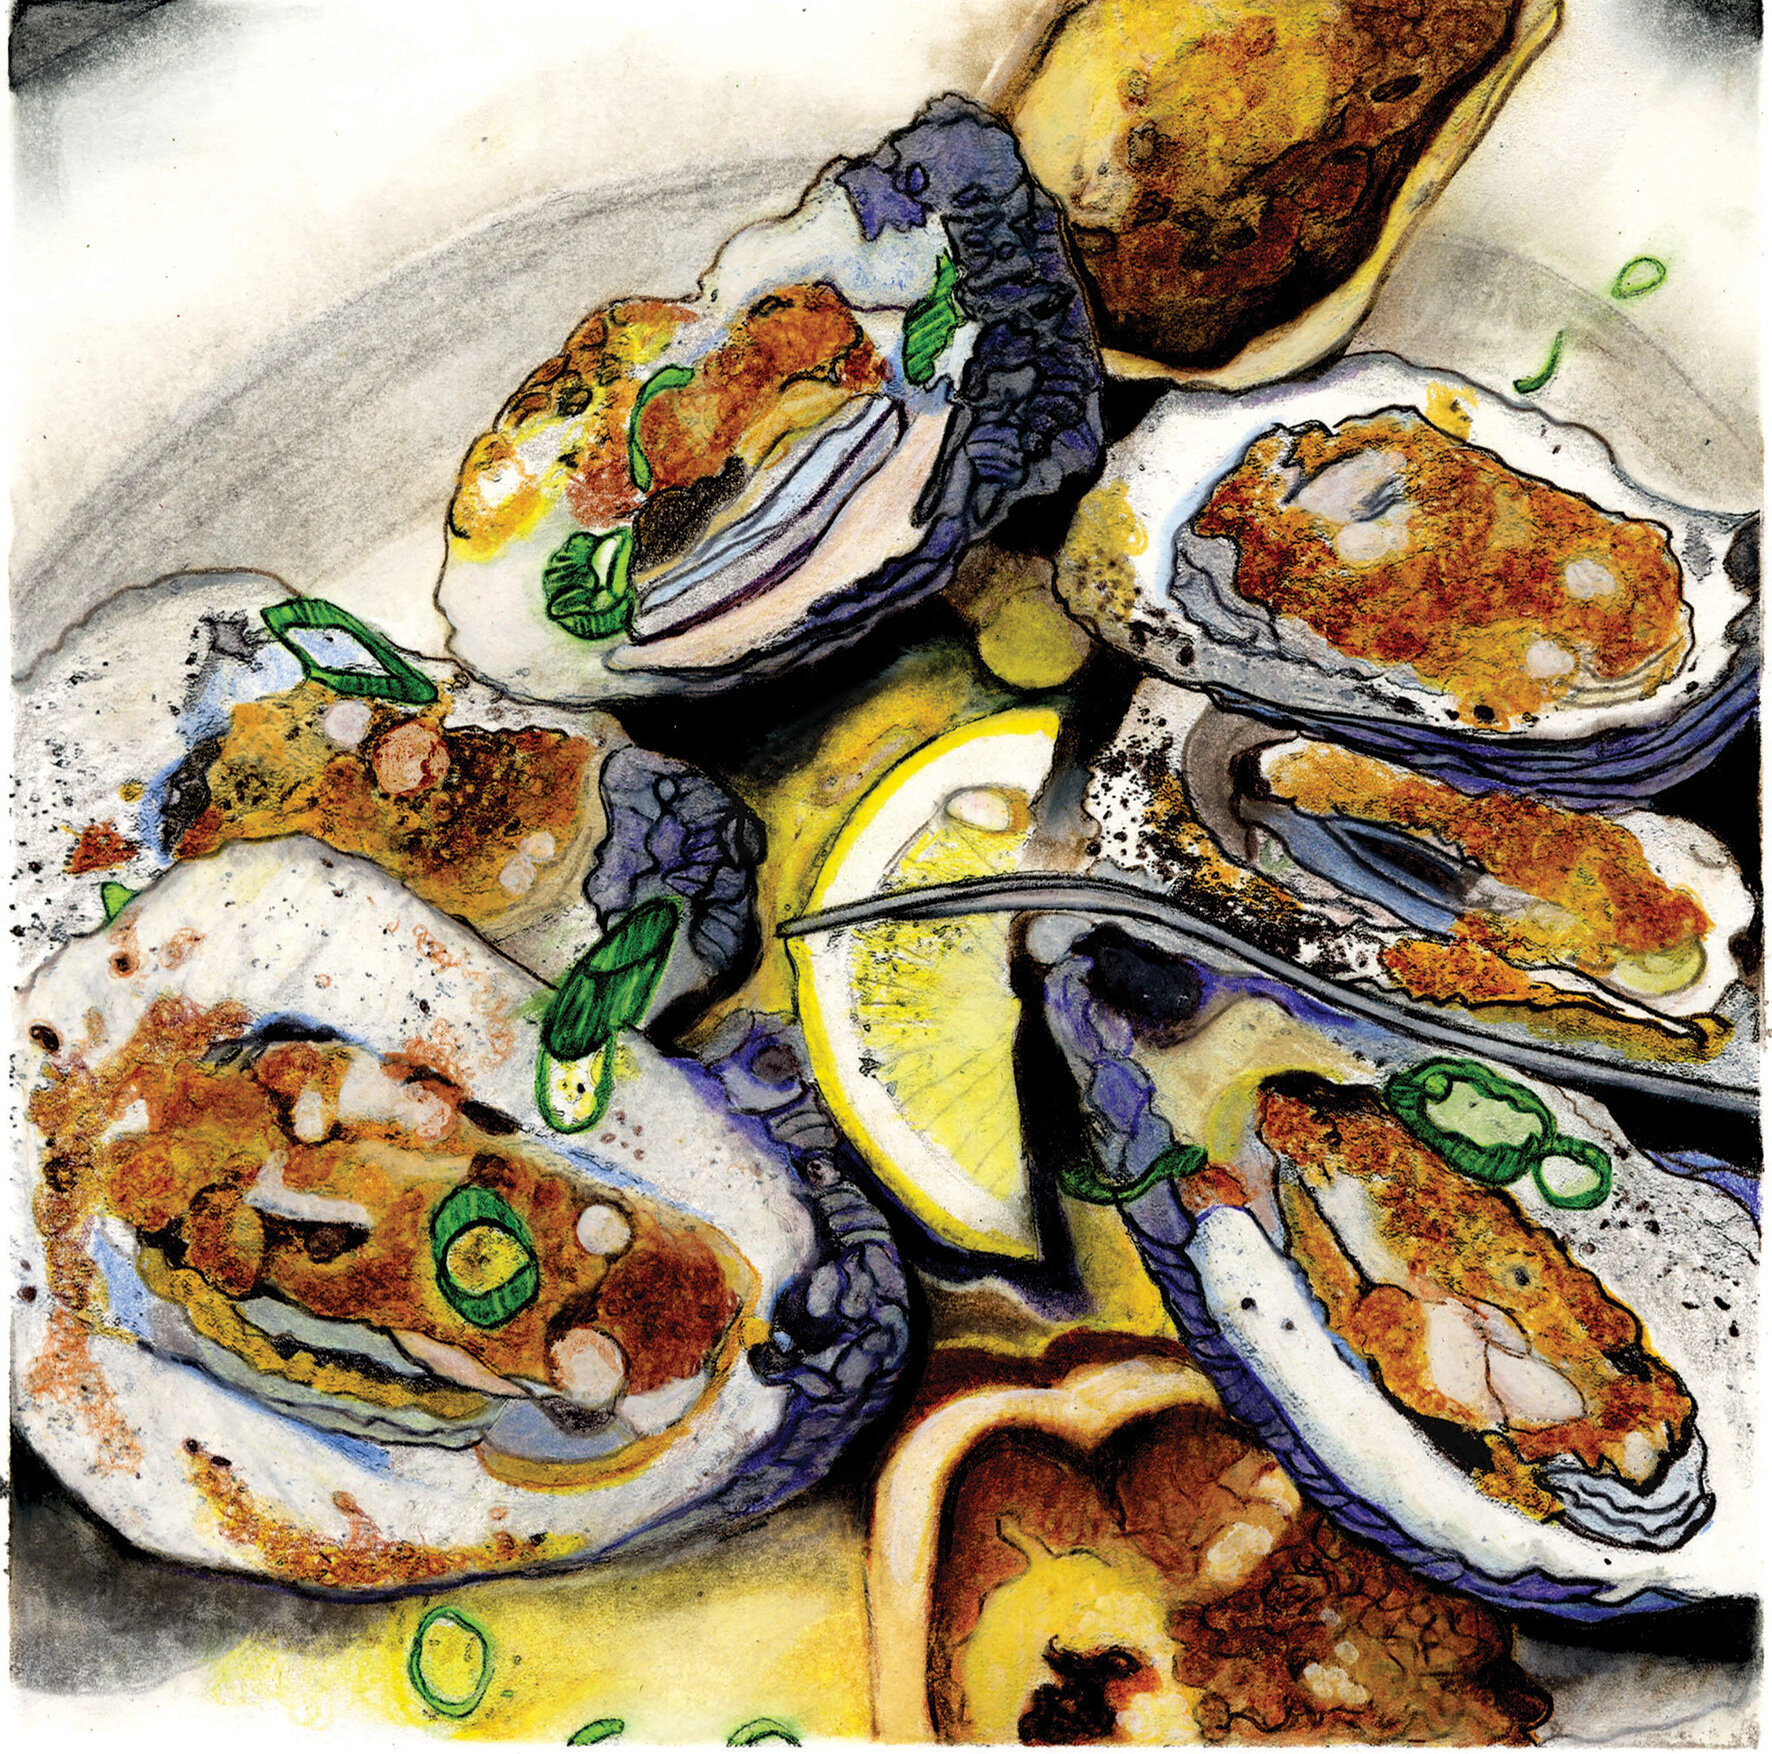 Broiled-Oysters-2020.jpg